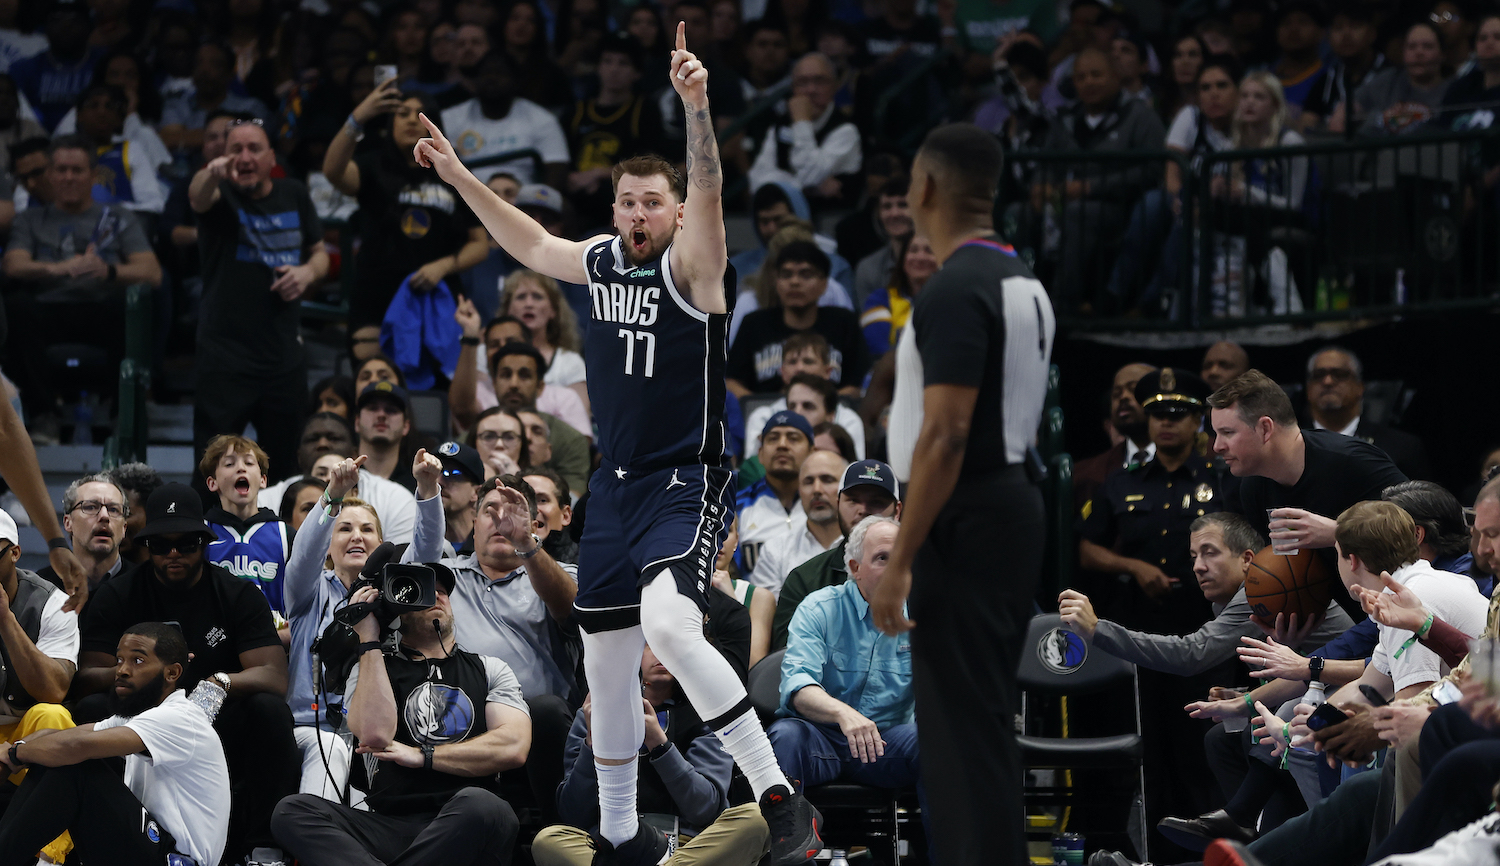 DALLAS, TEXAS - MARCH 22: Luka Doncic #77 of the Dallas Mavericks reacts after a call in the second half against the Golden State Warriors at American Airlines Center on March 22, 2023 in Dallas, Texas. NOTE TO USER: User expressly acknowledges and agrees that, by downloading and or using this photograph, User is consenting to the terms and conditions of the Getty Images License Agreement. (Photo by Tim Heitman/Getty Images)